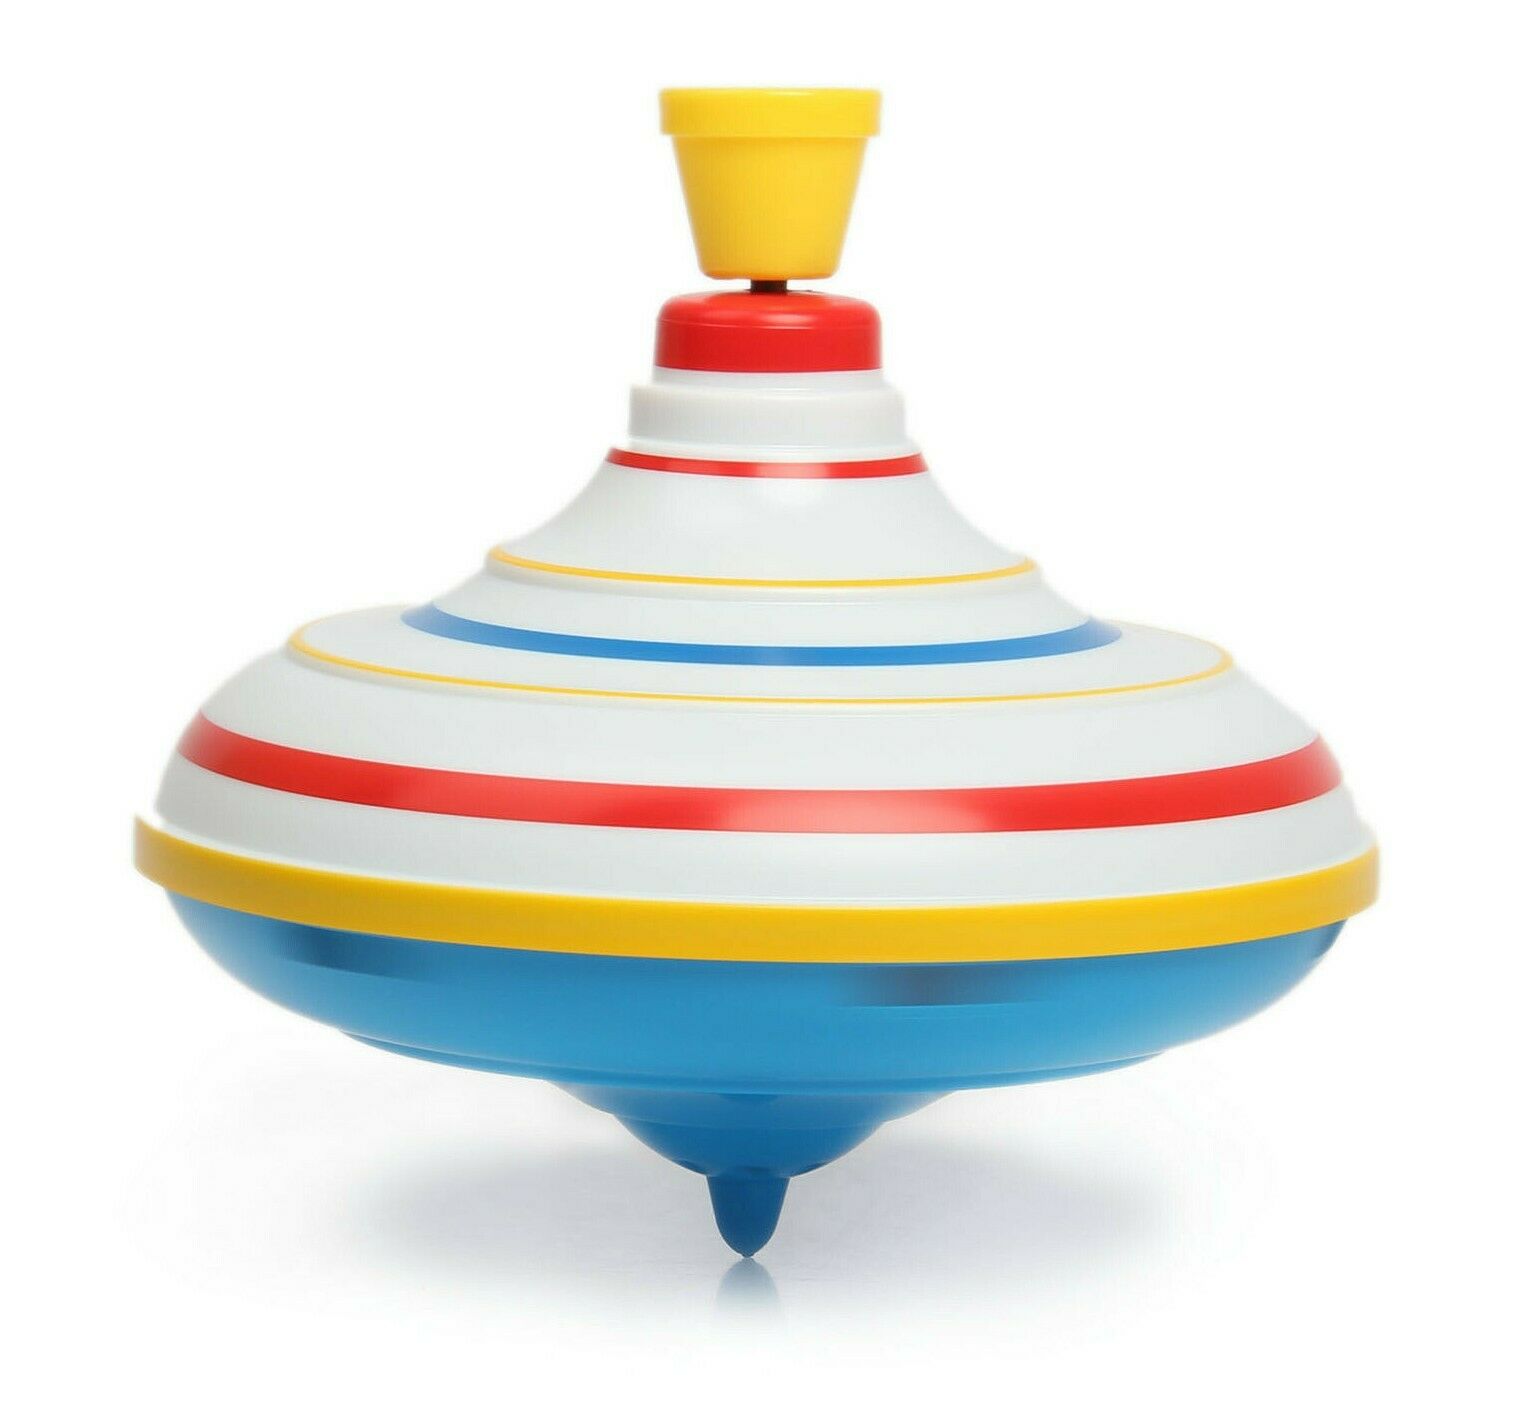 Russian Spinning Top Toy Volchok Yula With Stripes - Pump And Spin